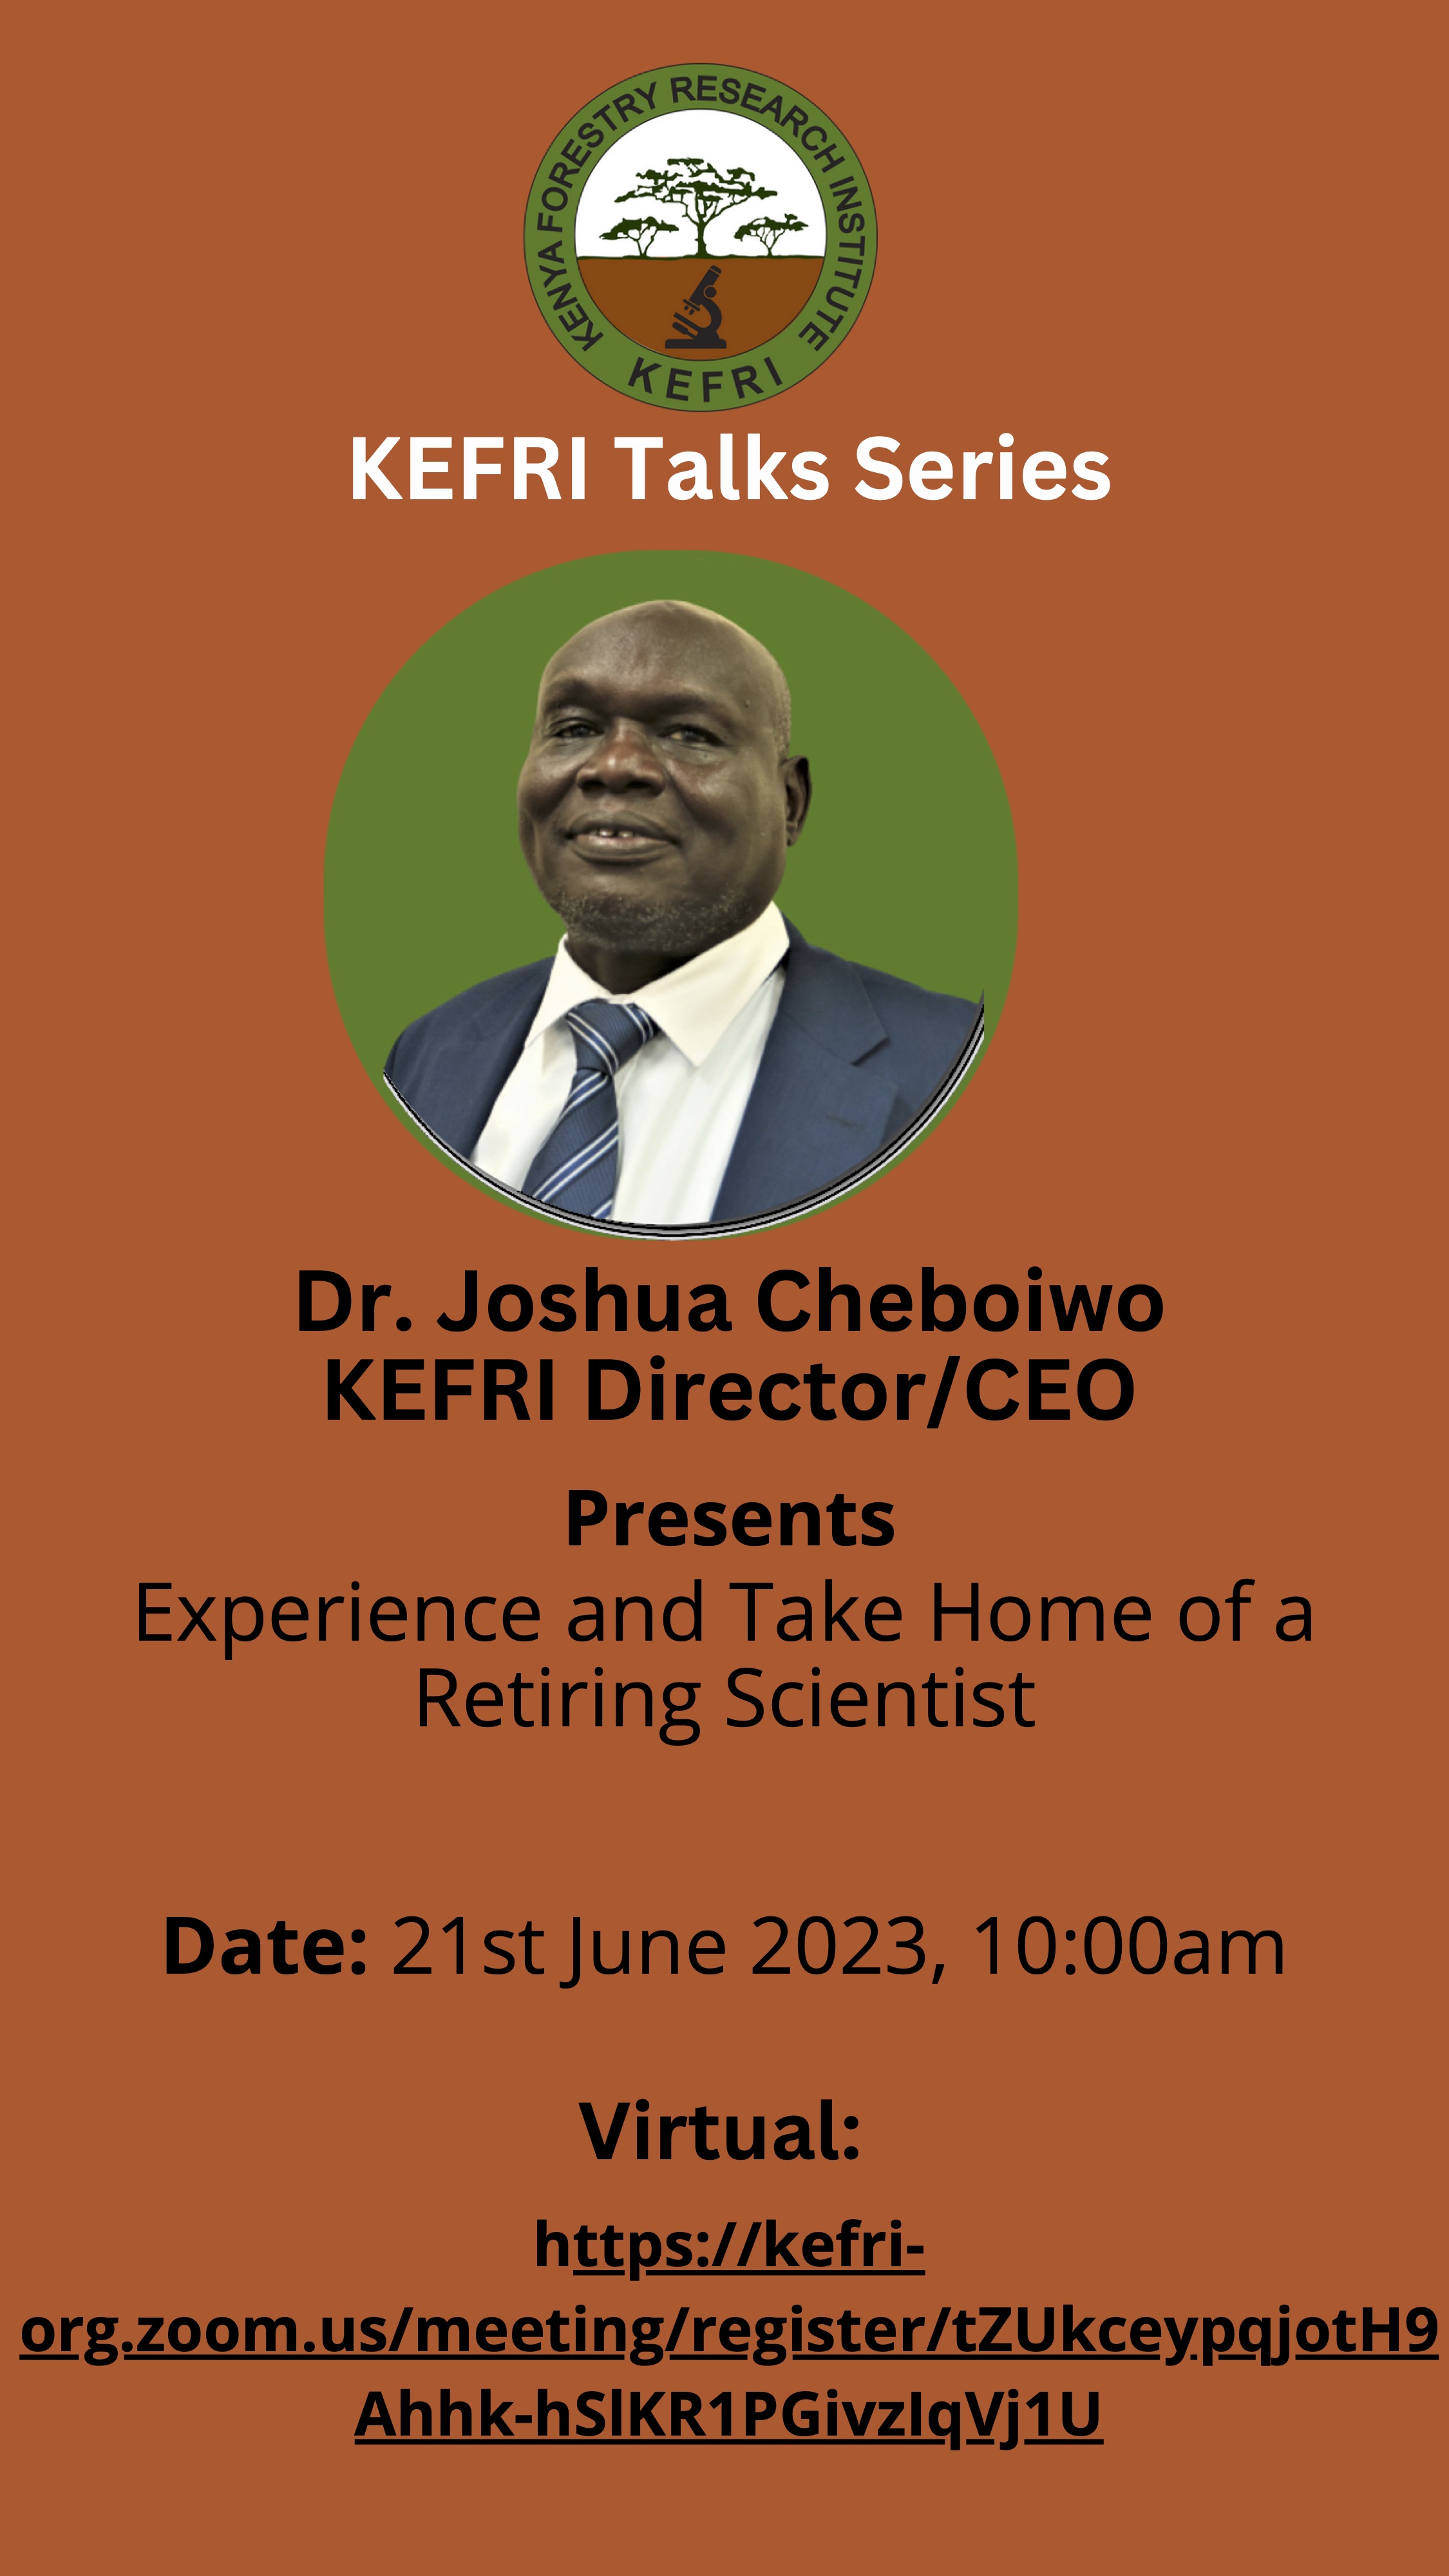 Dr. Joshua Cheboiwo, KEFRI Director/CEO: - Experience and Take Home of a Retiring Scientist